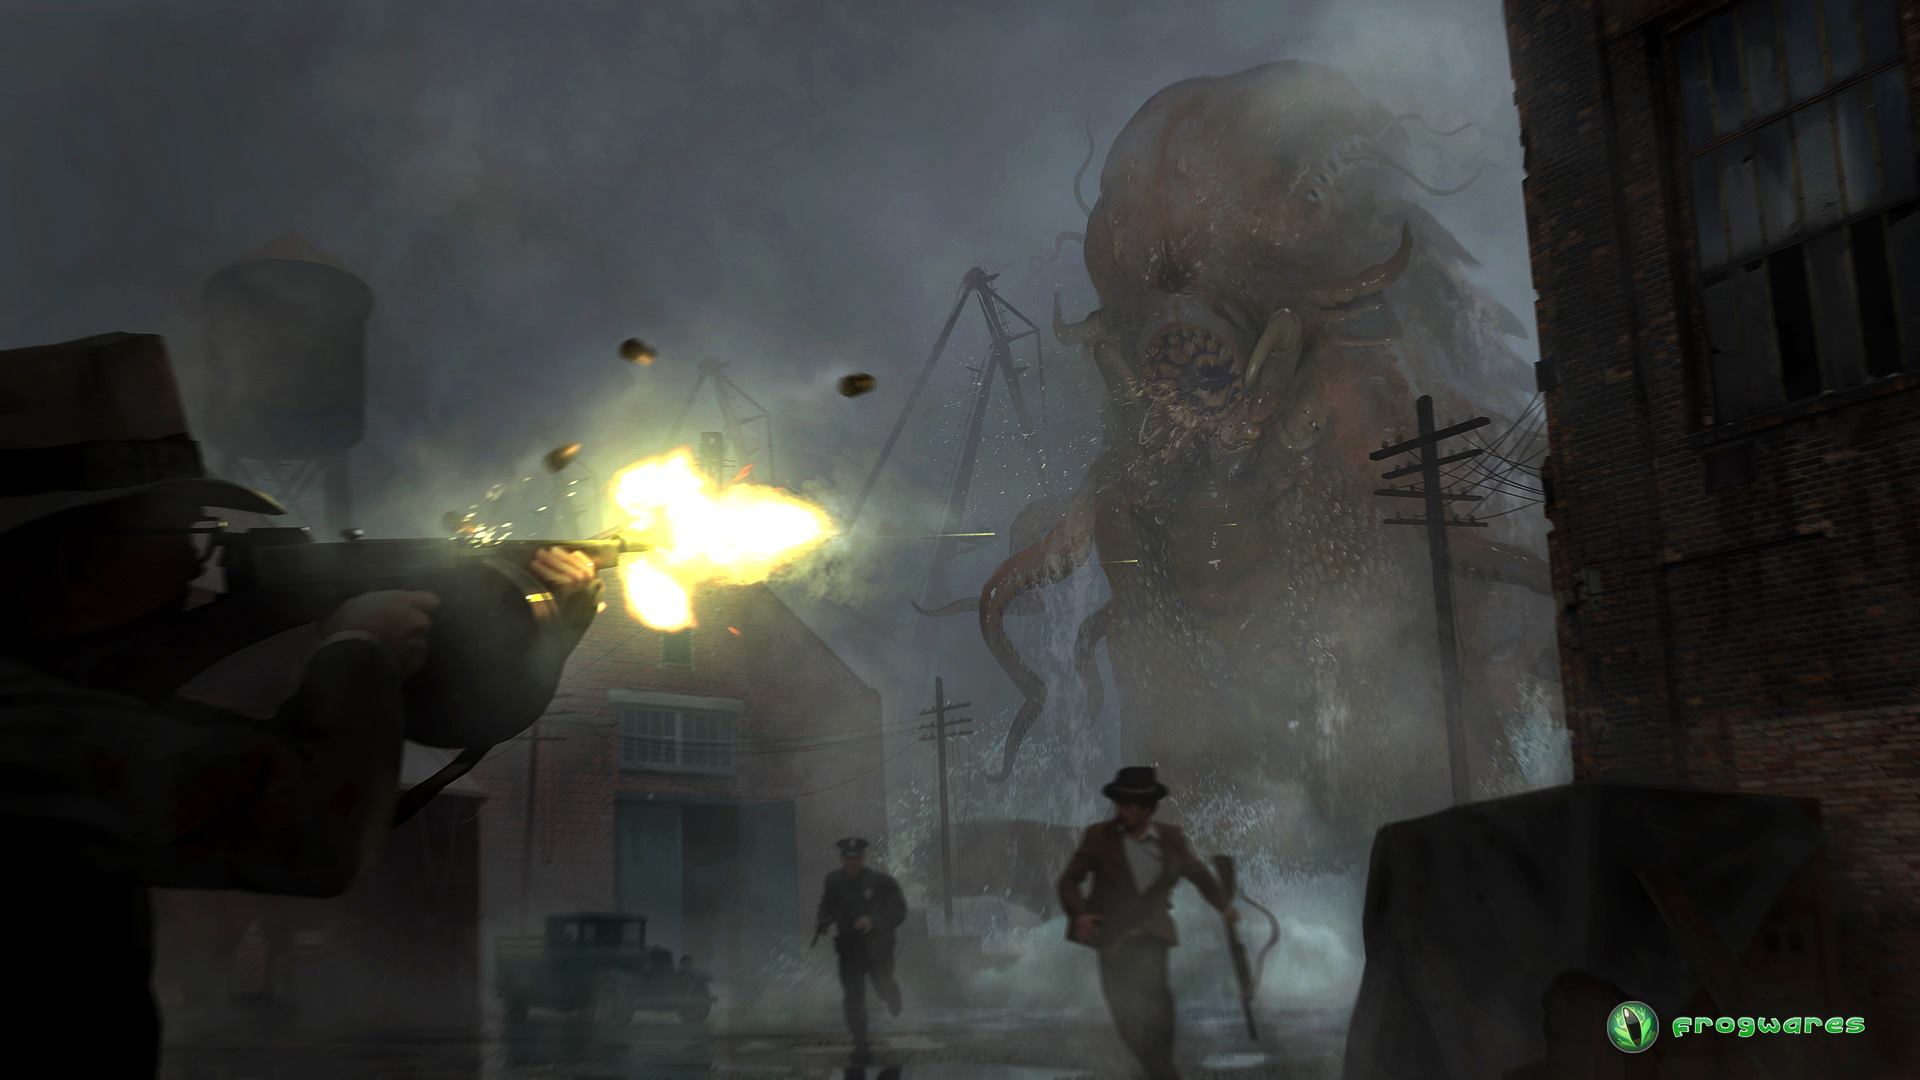 Praise the Old Ones! 'Call of Cthulhu' is Coming in 2017 - Bloody Disgusting